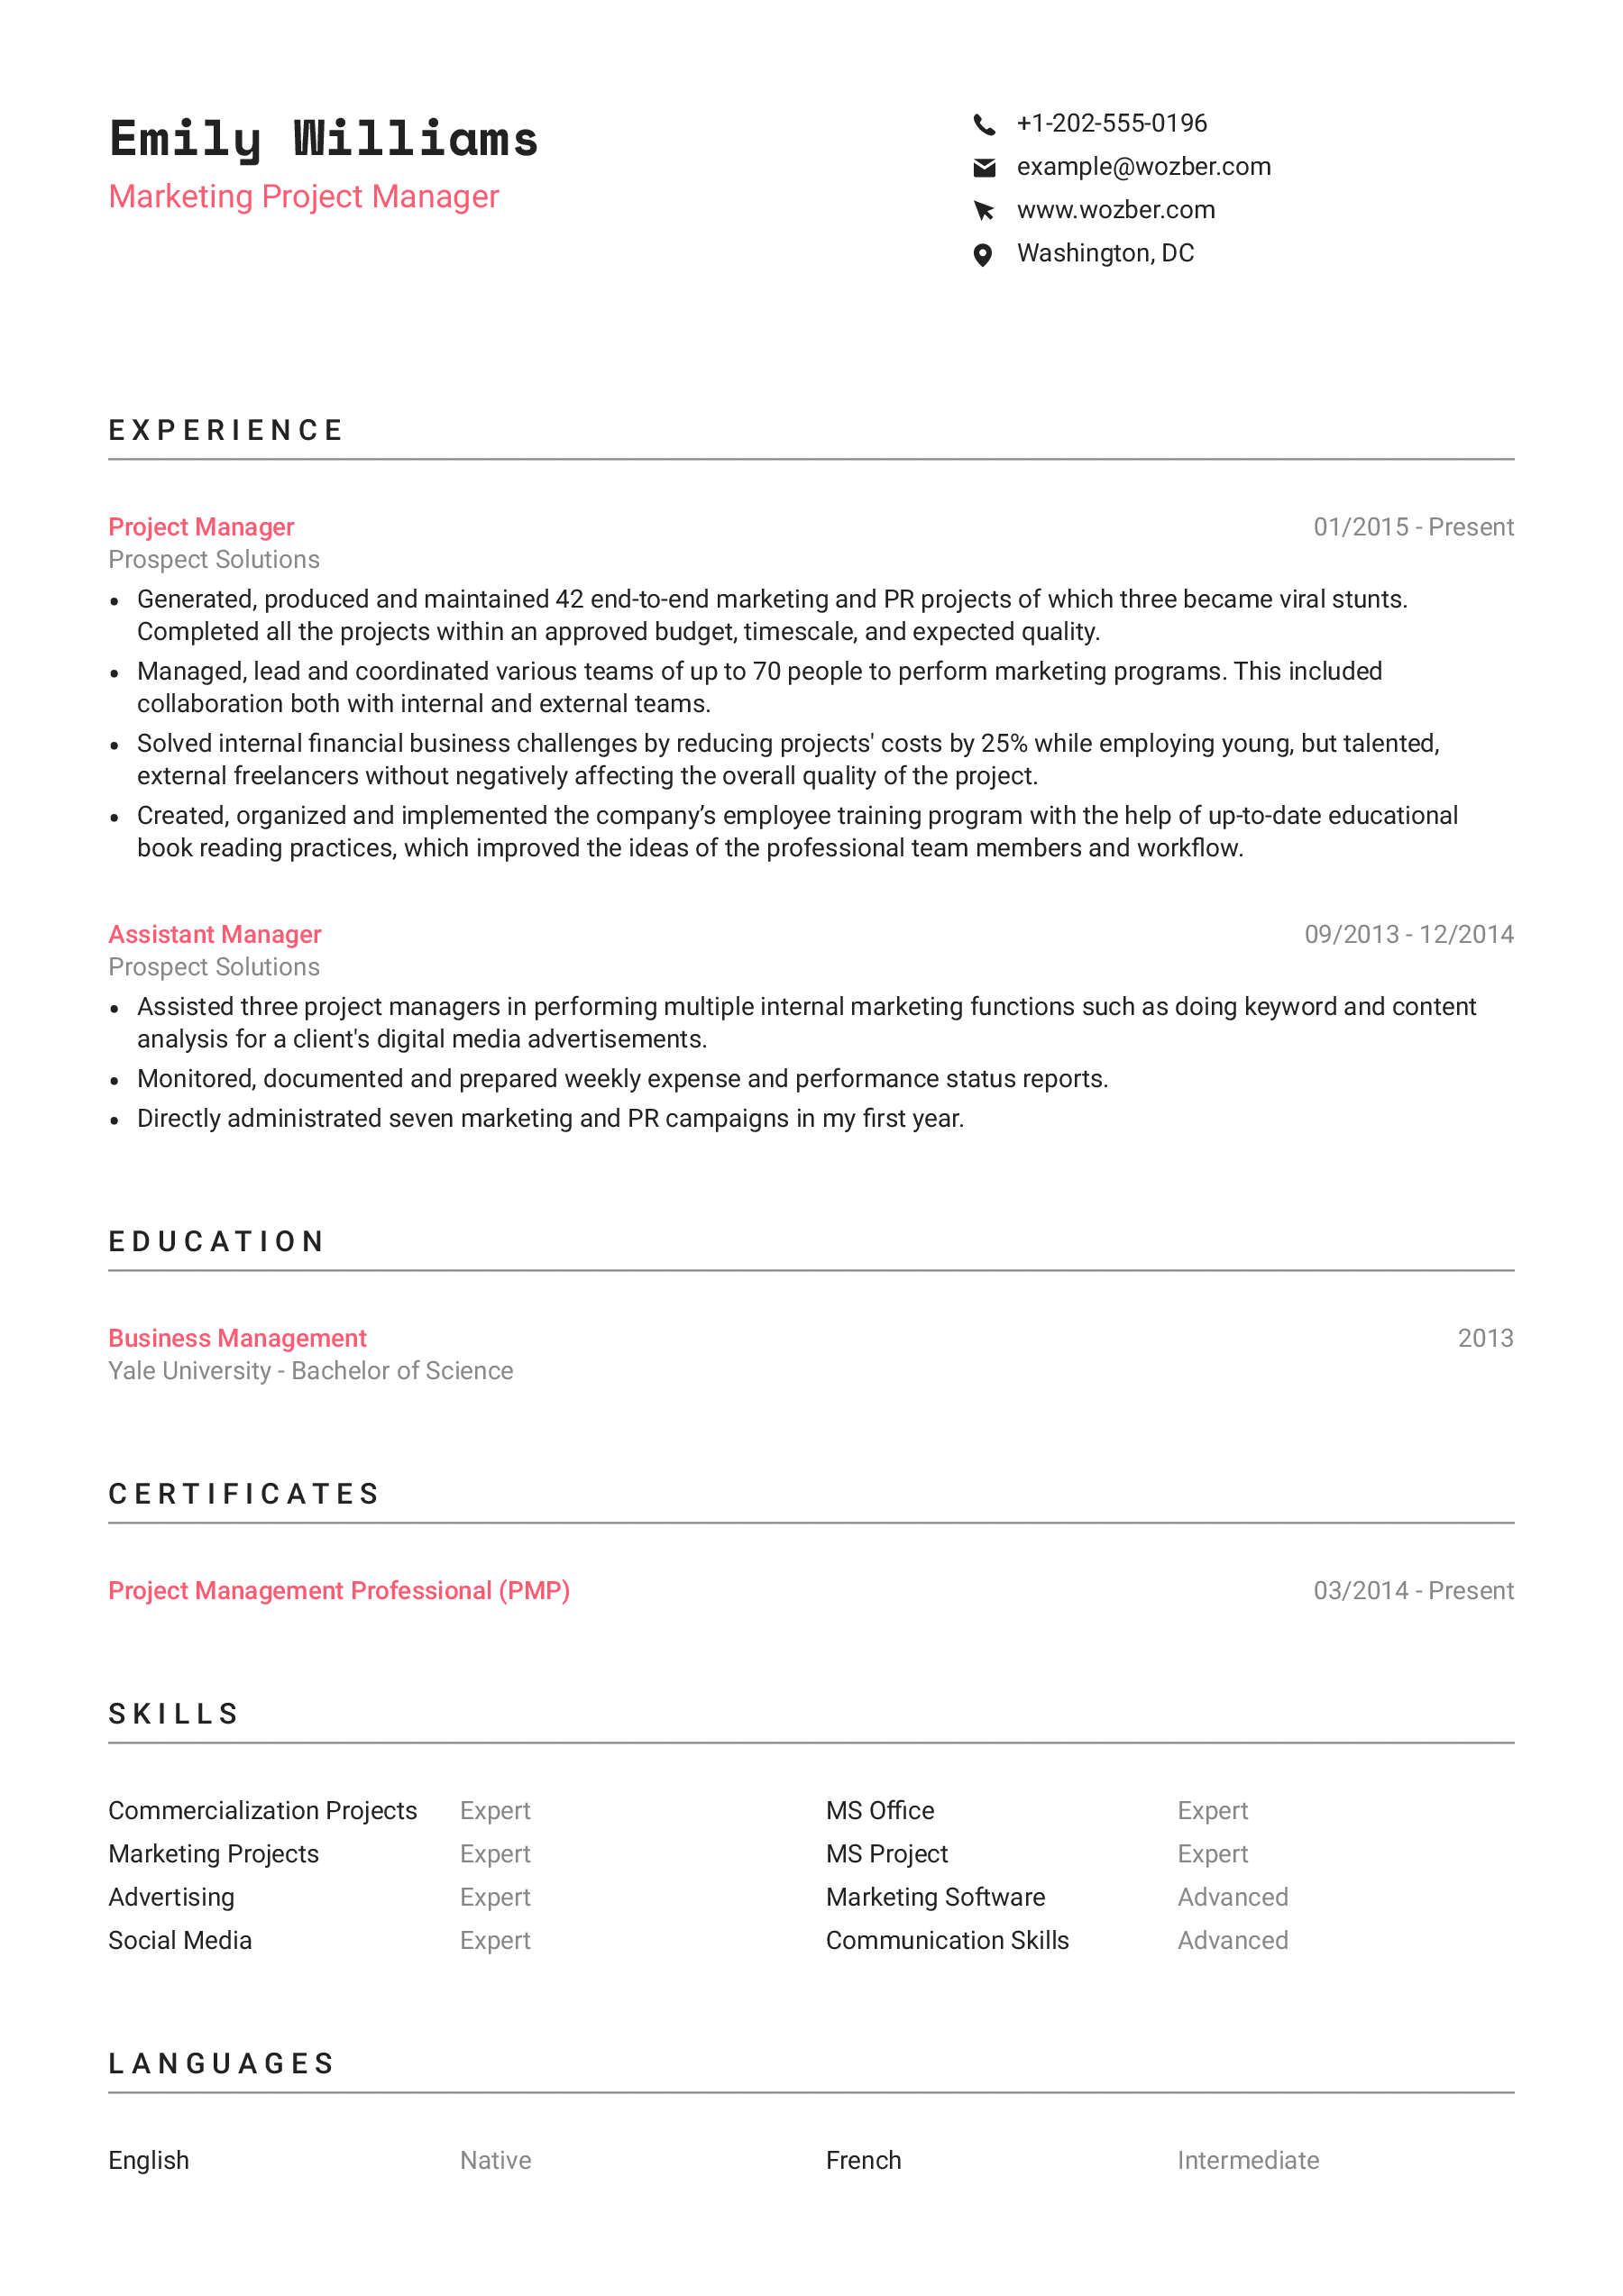 Modern resume example for Digital Marketing Project Manager 4 position